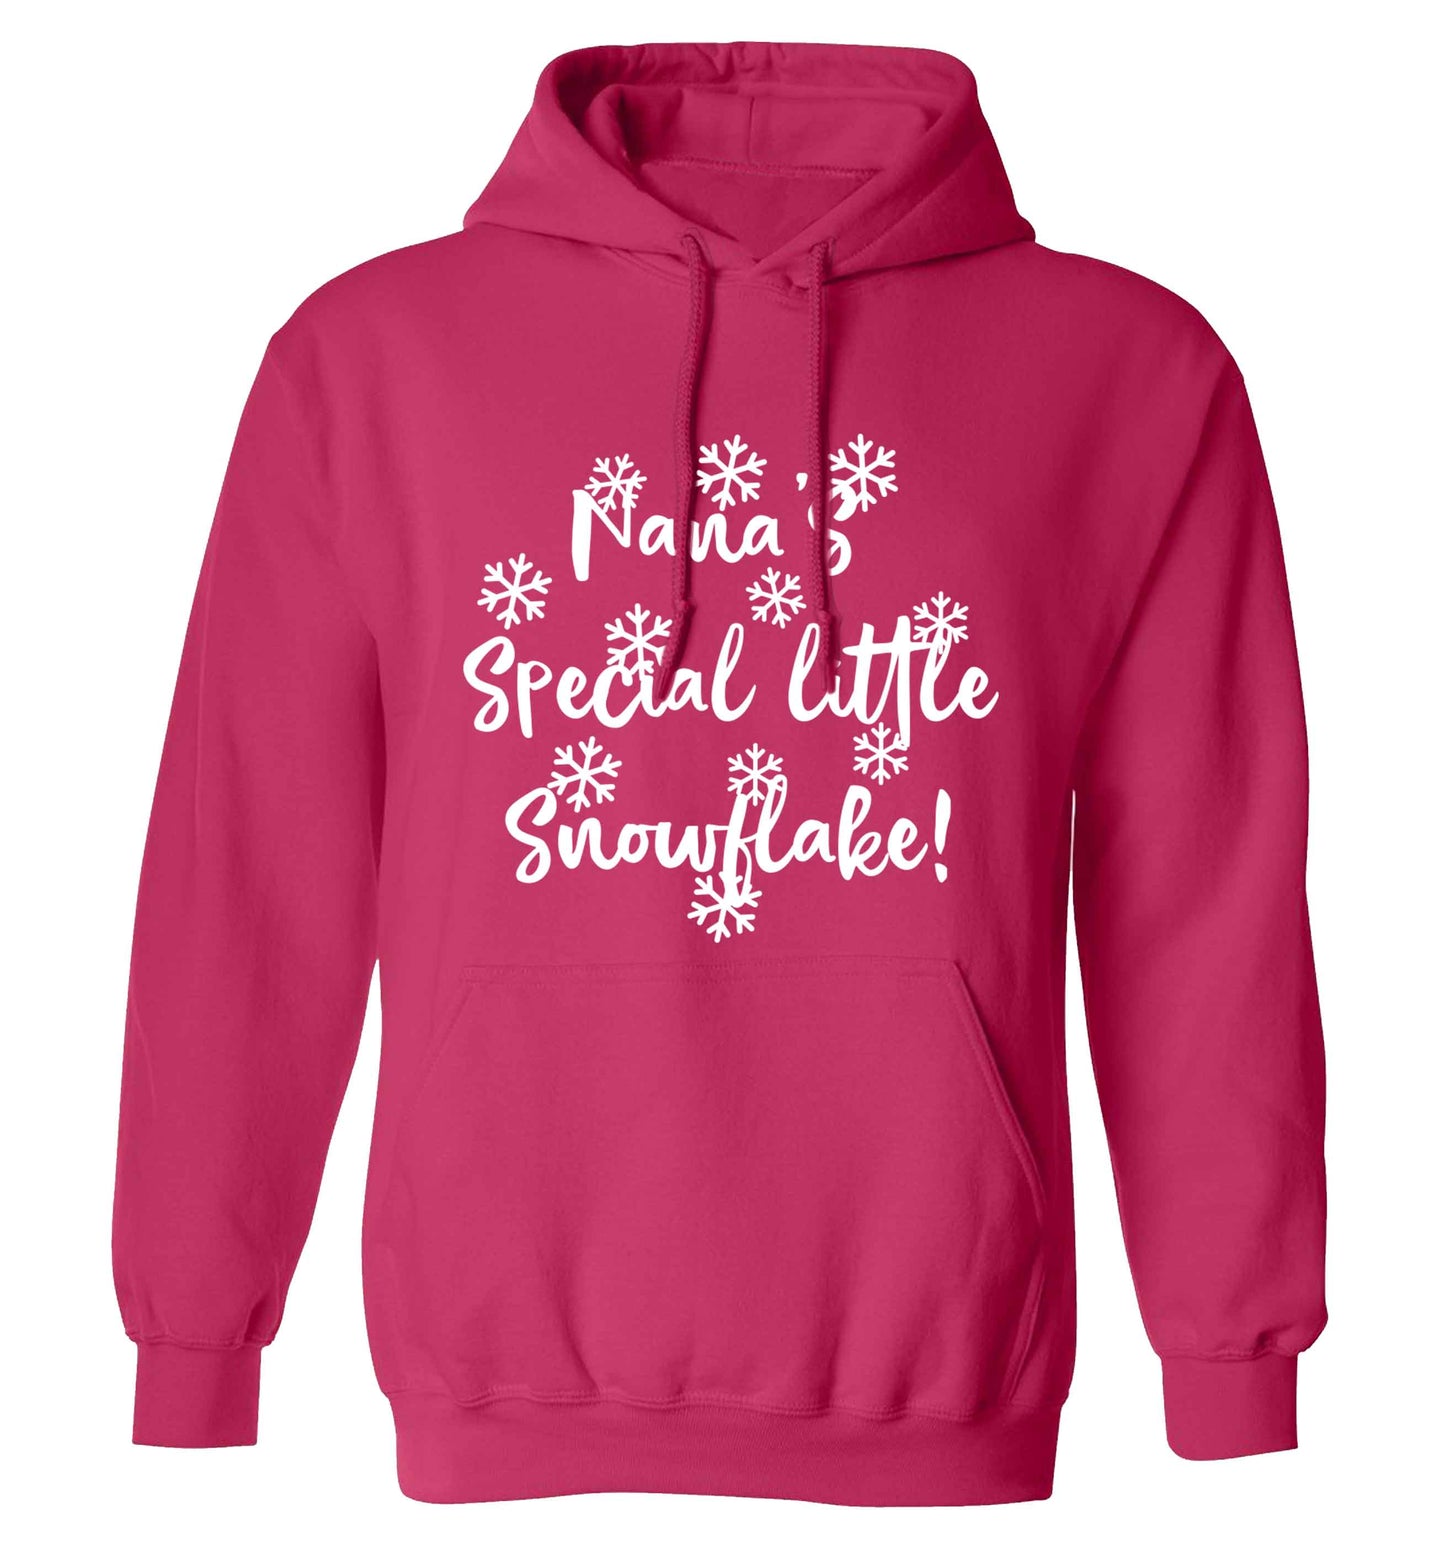 Nana's special little snowflake adults unisex pink hoodie 2XL